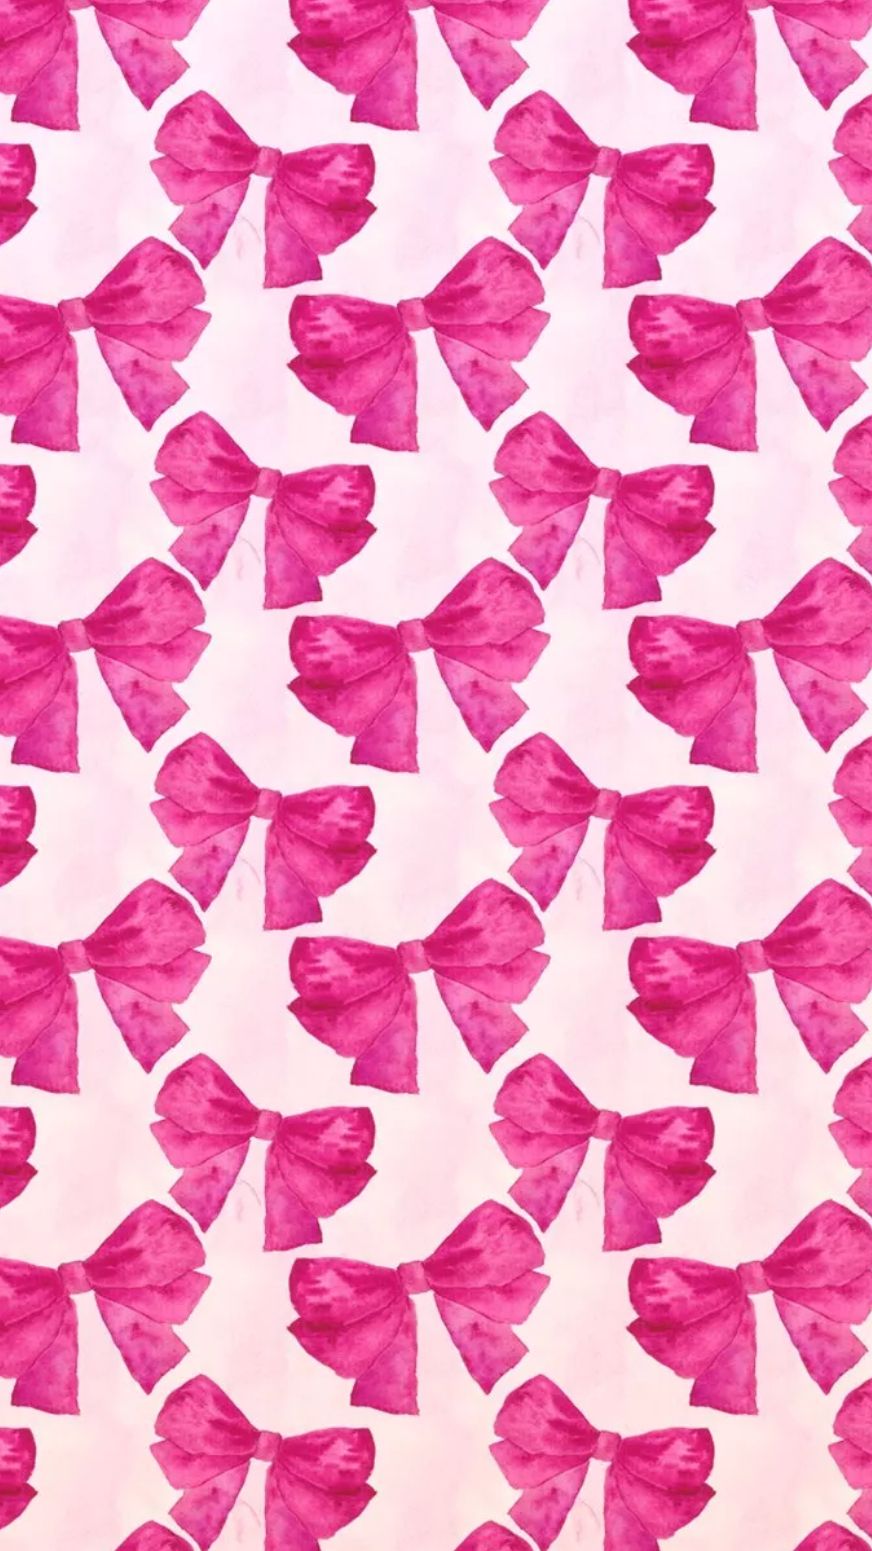 Pink Bow Wallpaper. Bow wallpaper, Aesthetic iphone wallpaper, iPhone wallpaper